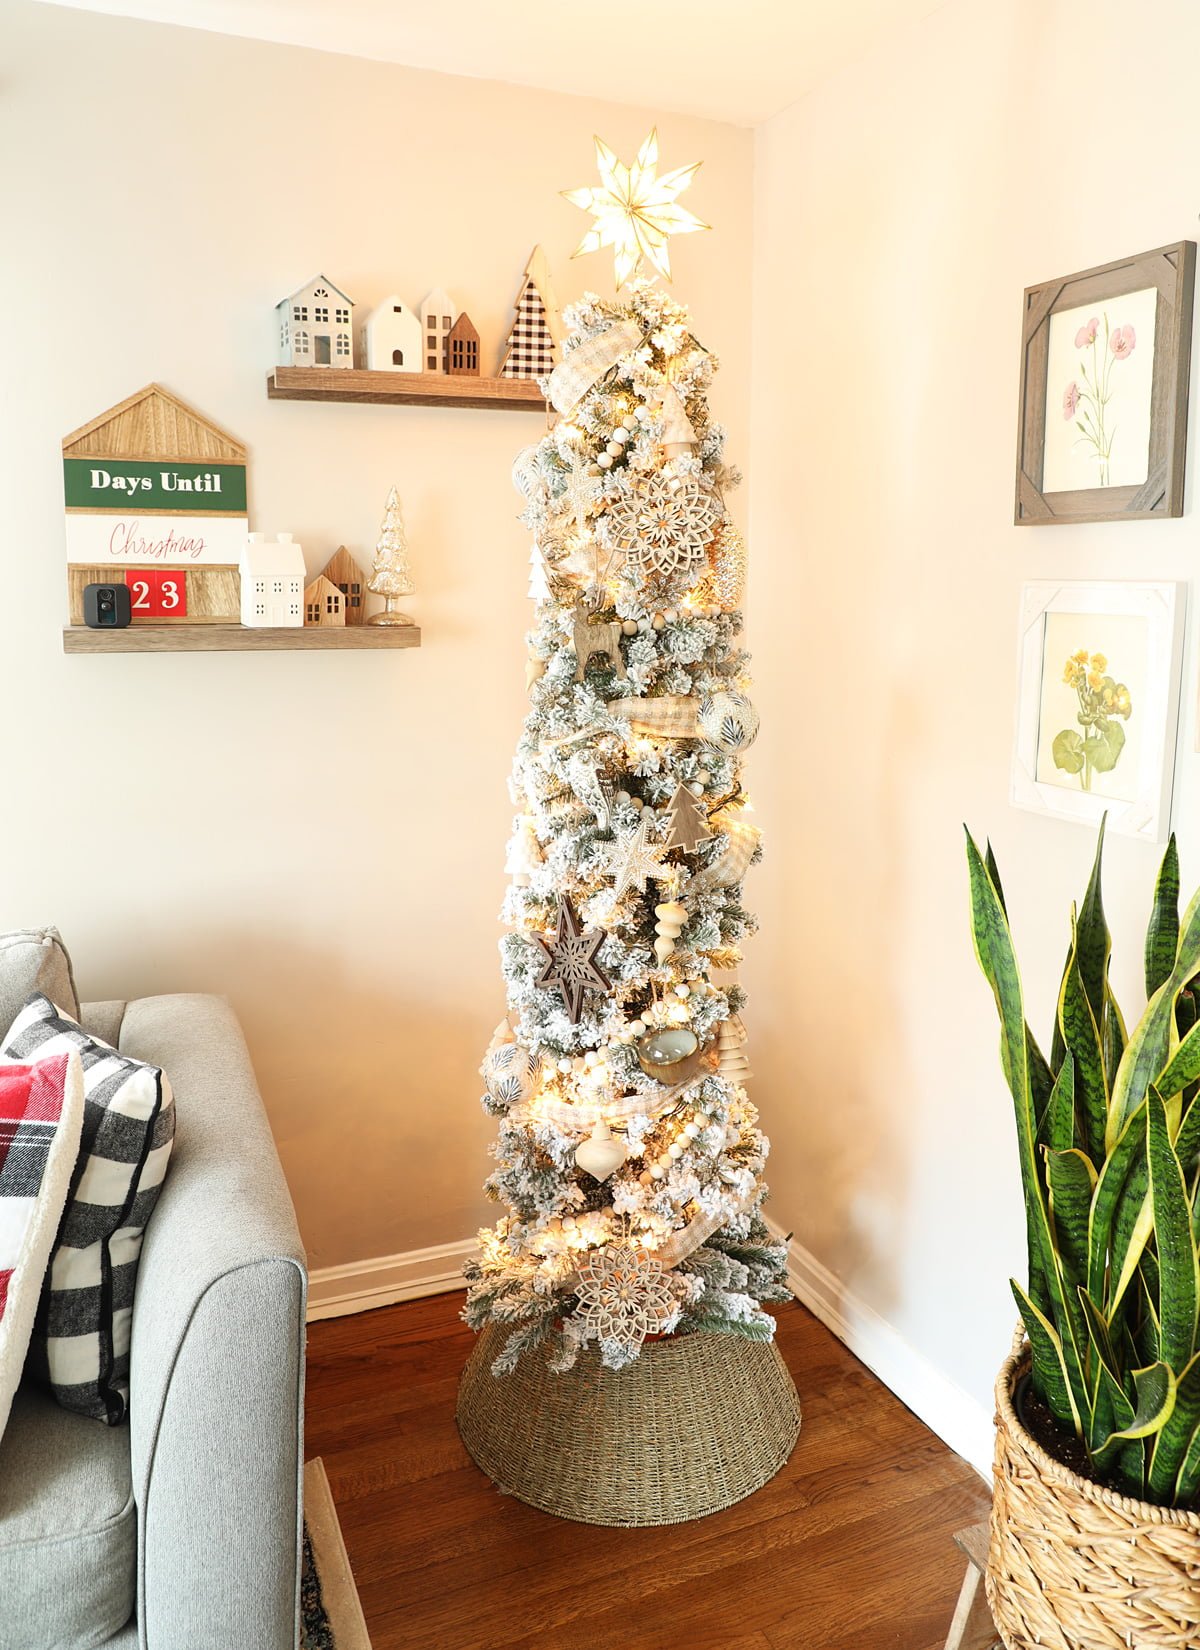 Flocked Pencil Tree with Wooden Ornaments